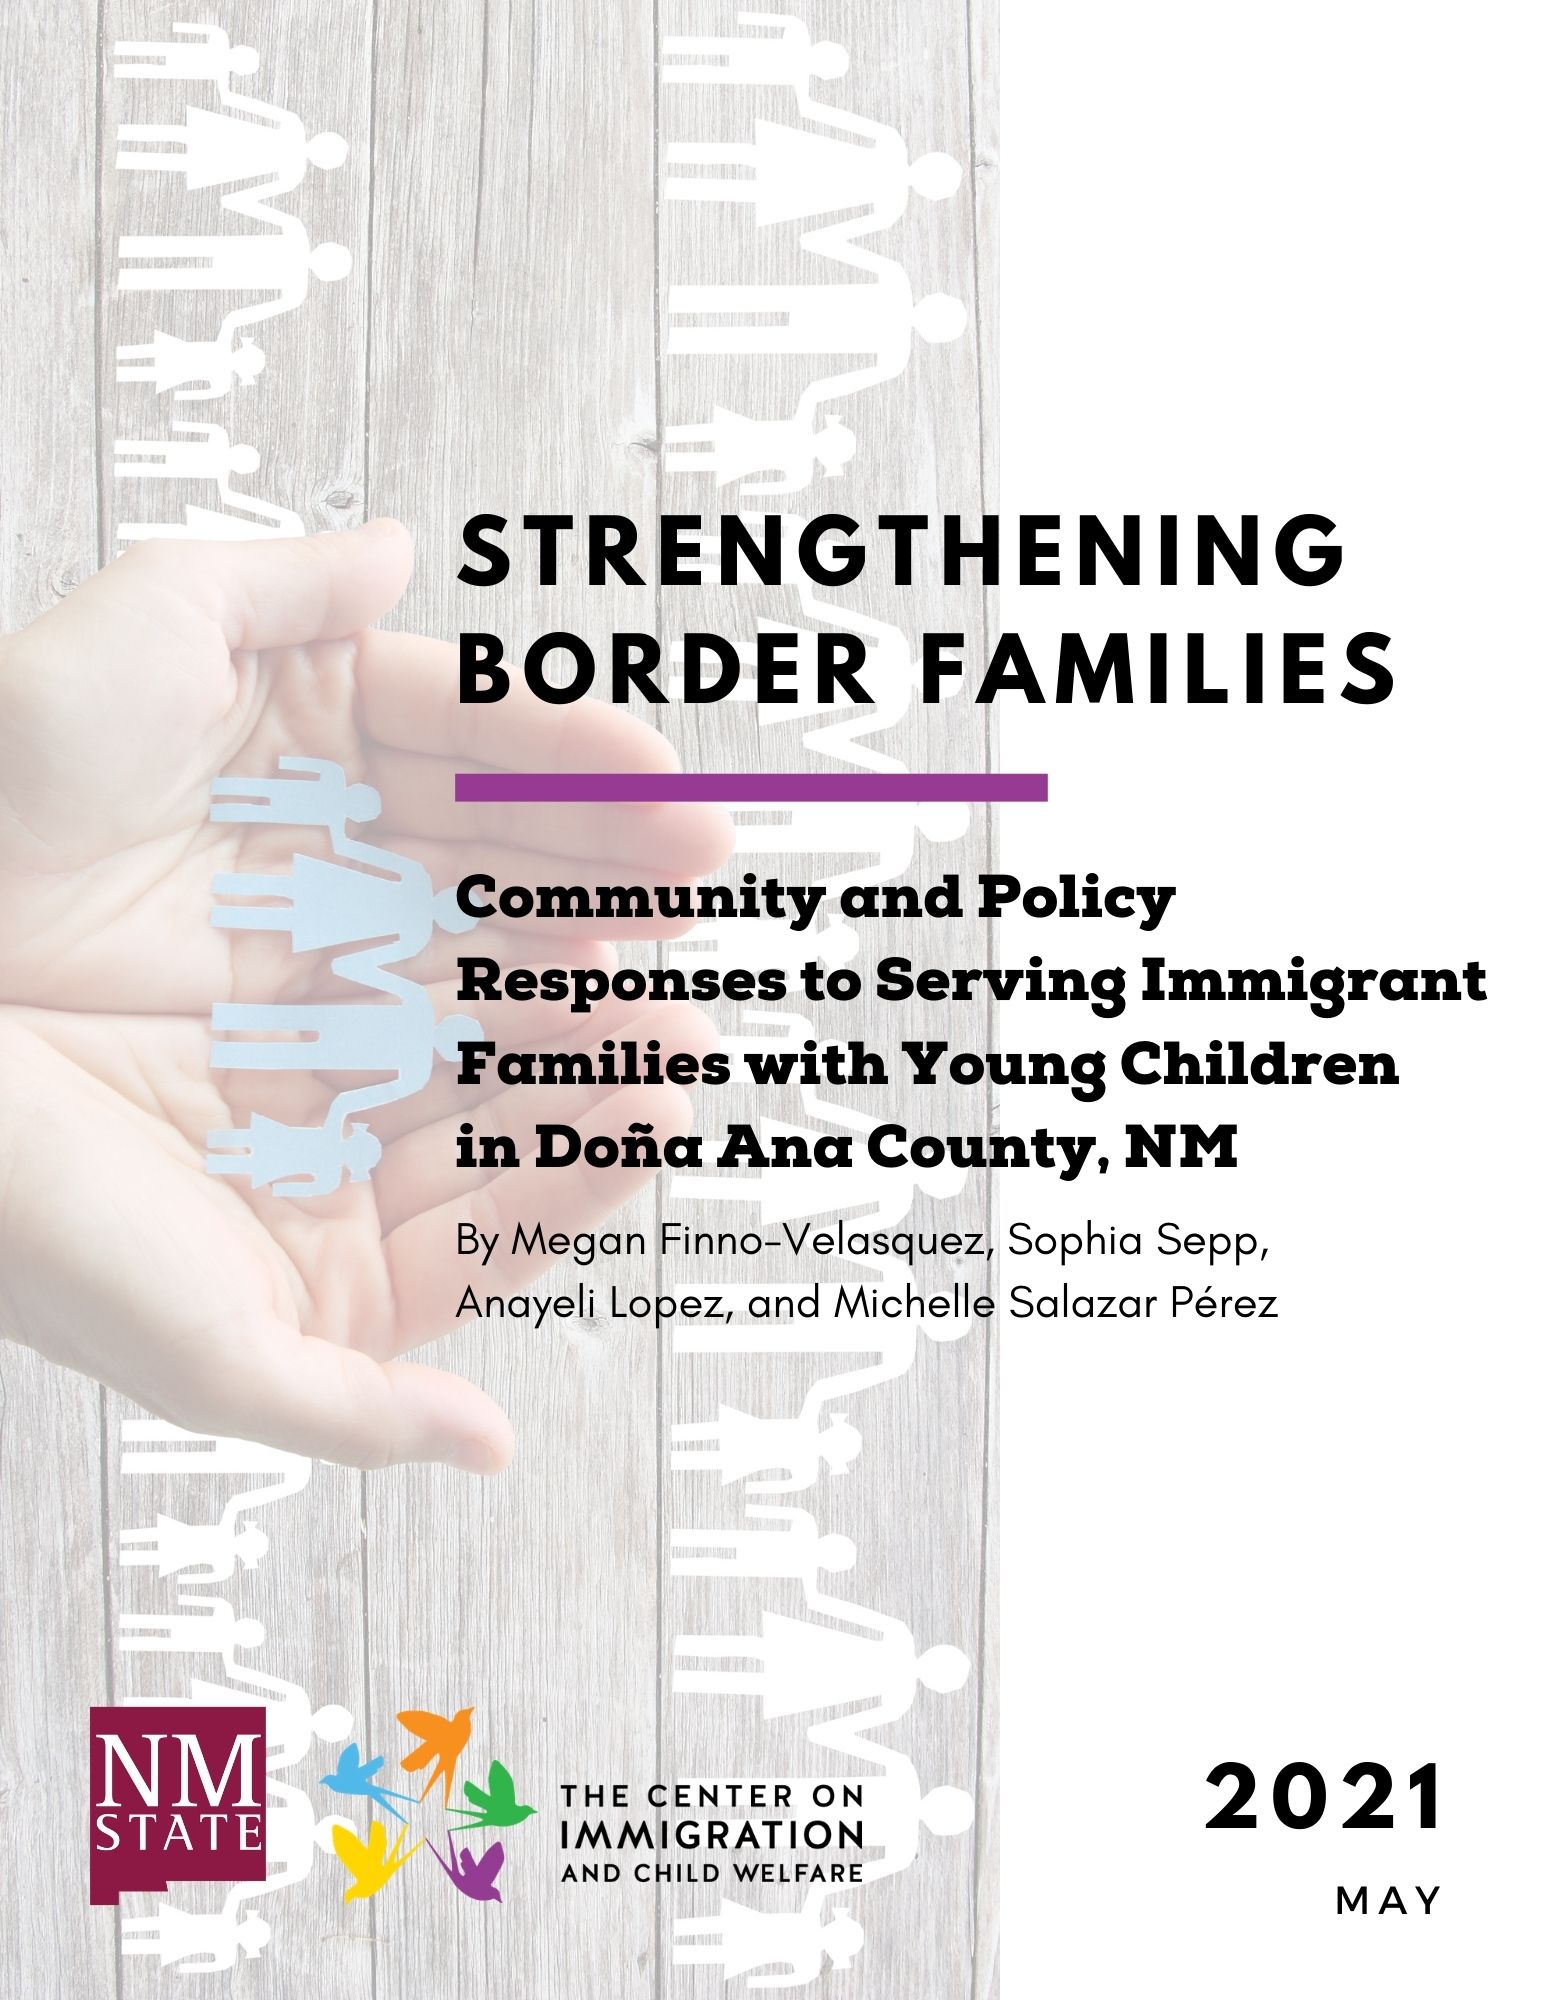 Strengthening Border Families Community and Policy Responses to Serving Immigrant Families with Young Children